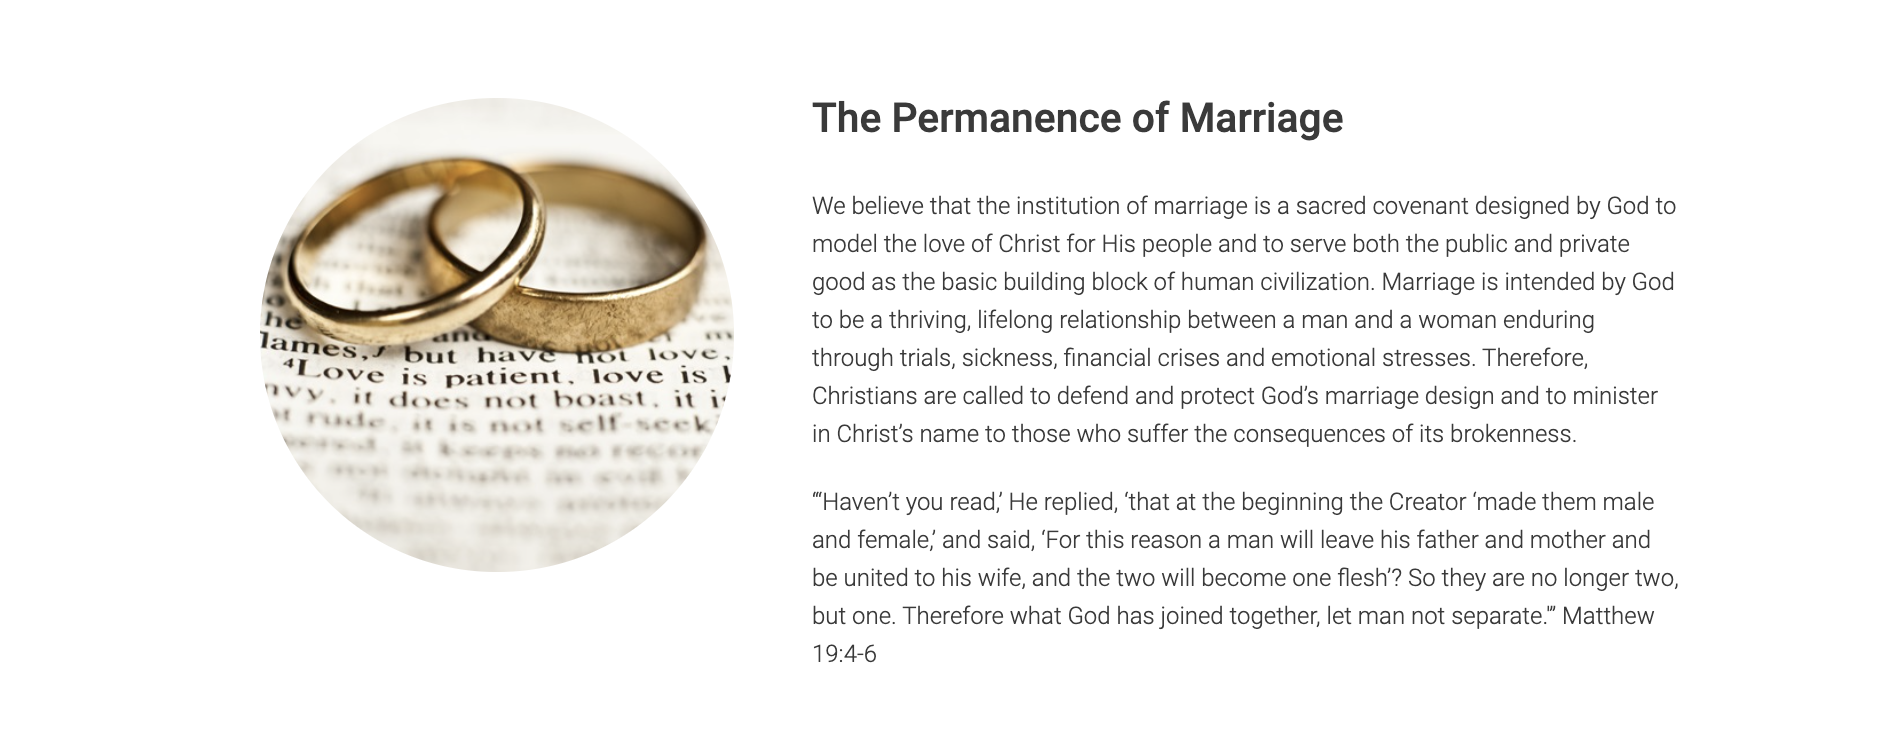 Focus on the Family Permanence View Statement on their "Foundational Values" and Vision Page.